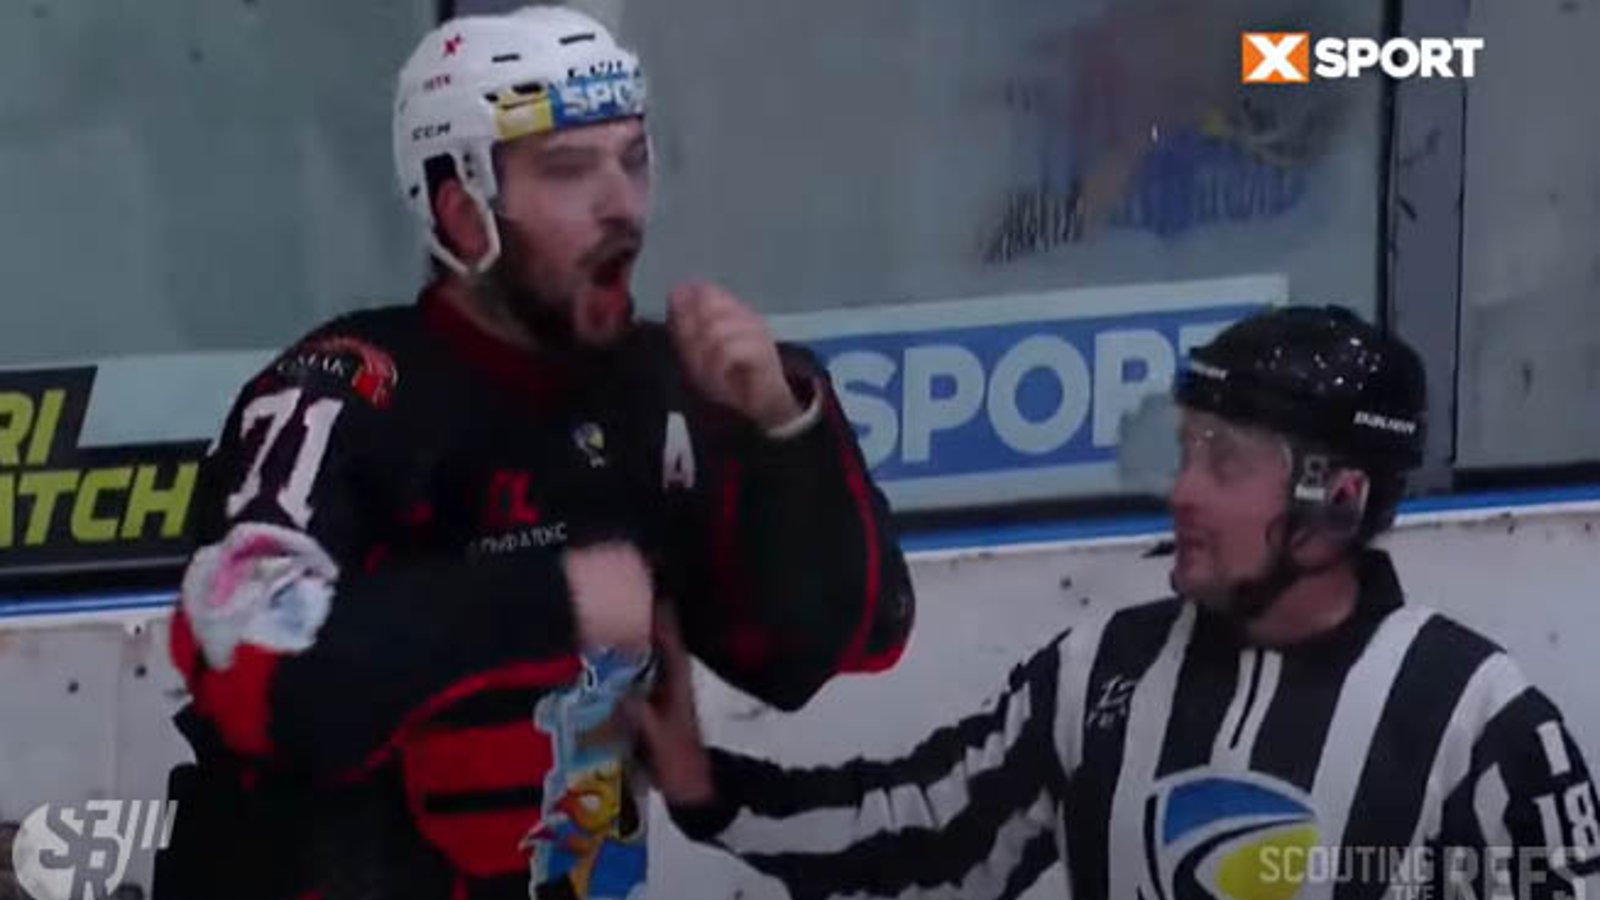 Ukrainian league GM gets fired for speaking out against racism following Deniskin’s pathetic suspension 